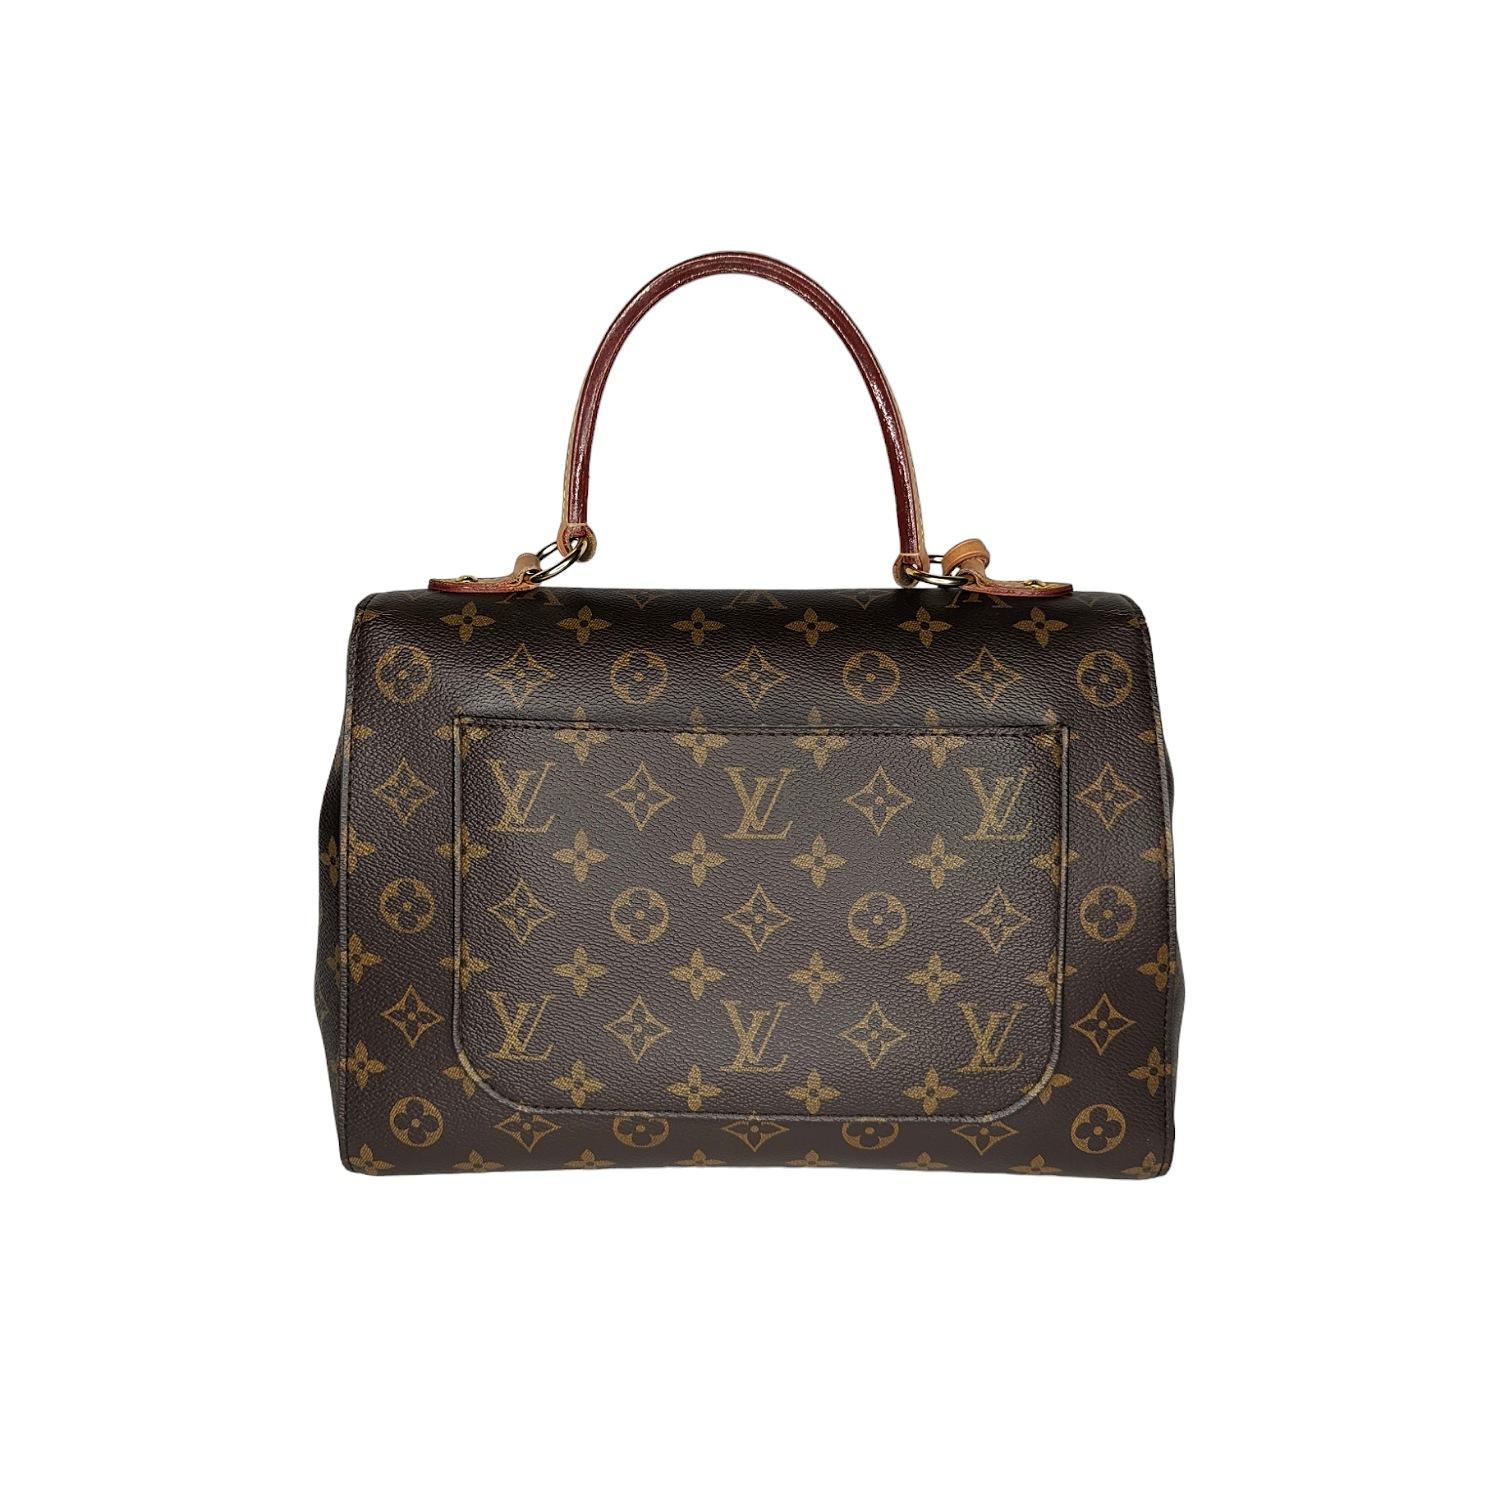 Louis Vuitton Cluny MM Top Handle Bag By Nicolas Ghesquière. This lovely handbag is crafted of monogram toile canvas. The handbag features a vachetta top handle and brass hardware. The flap opens to a twill fabric interior with patch pockets and a